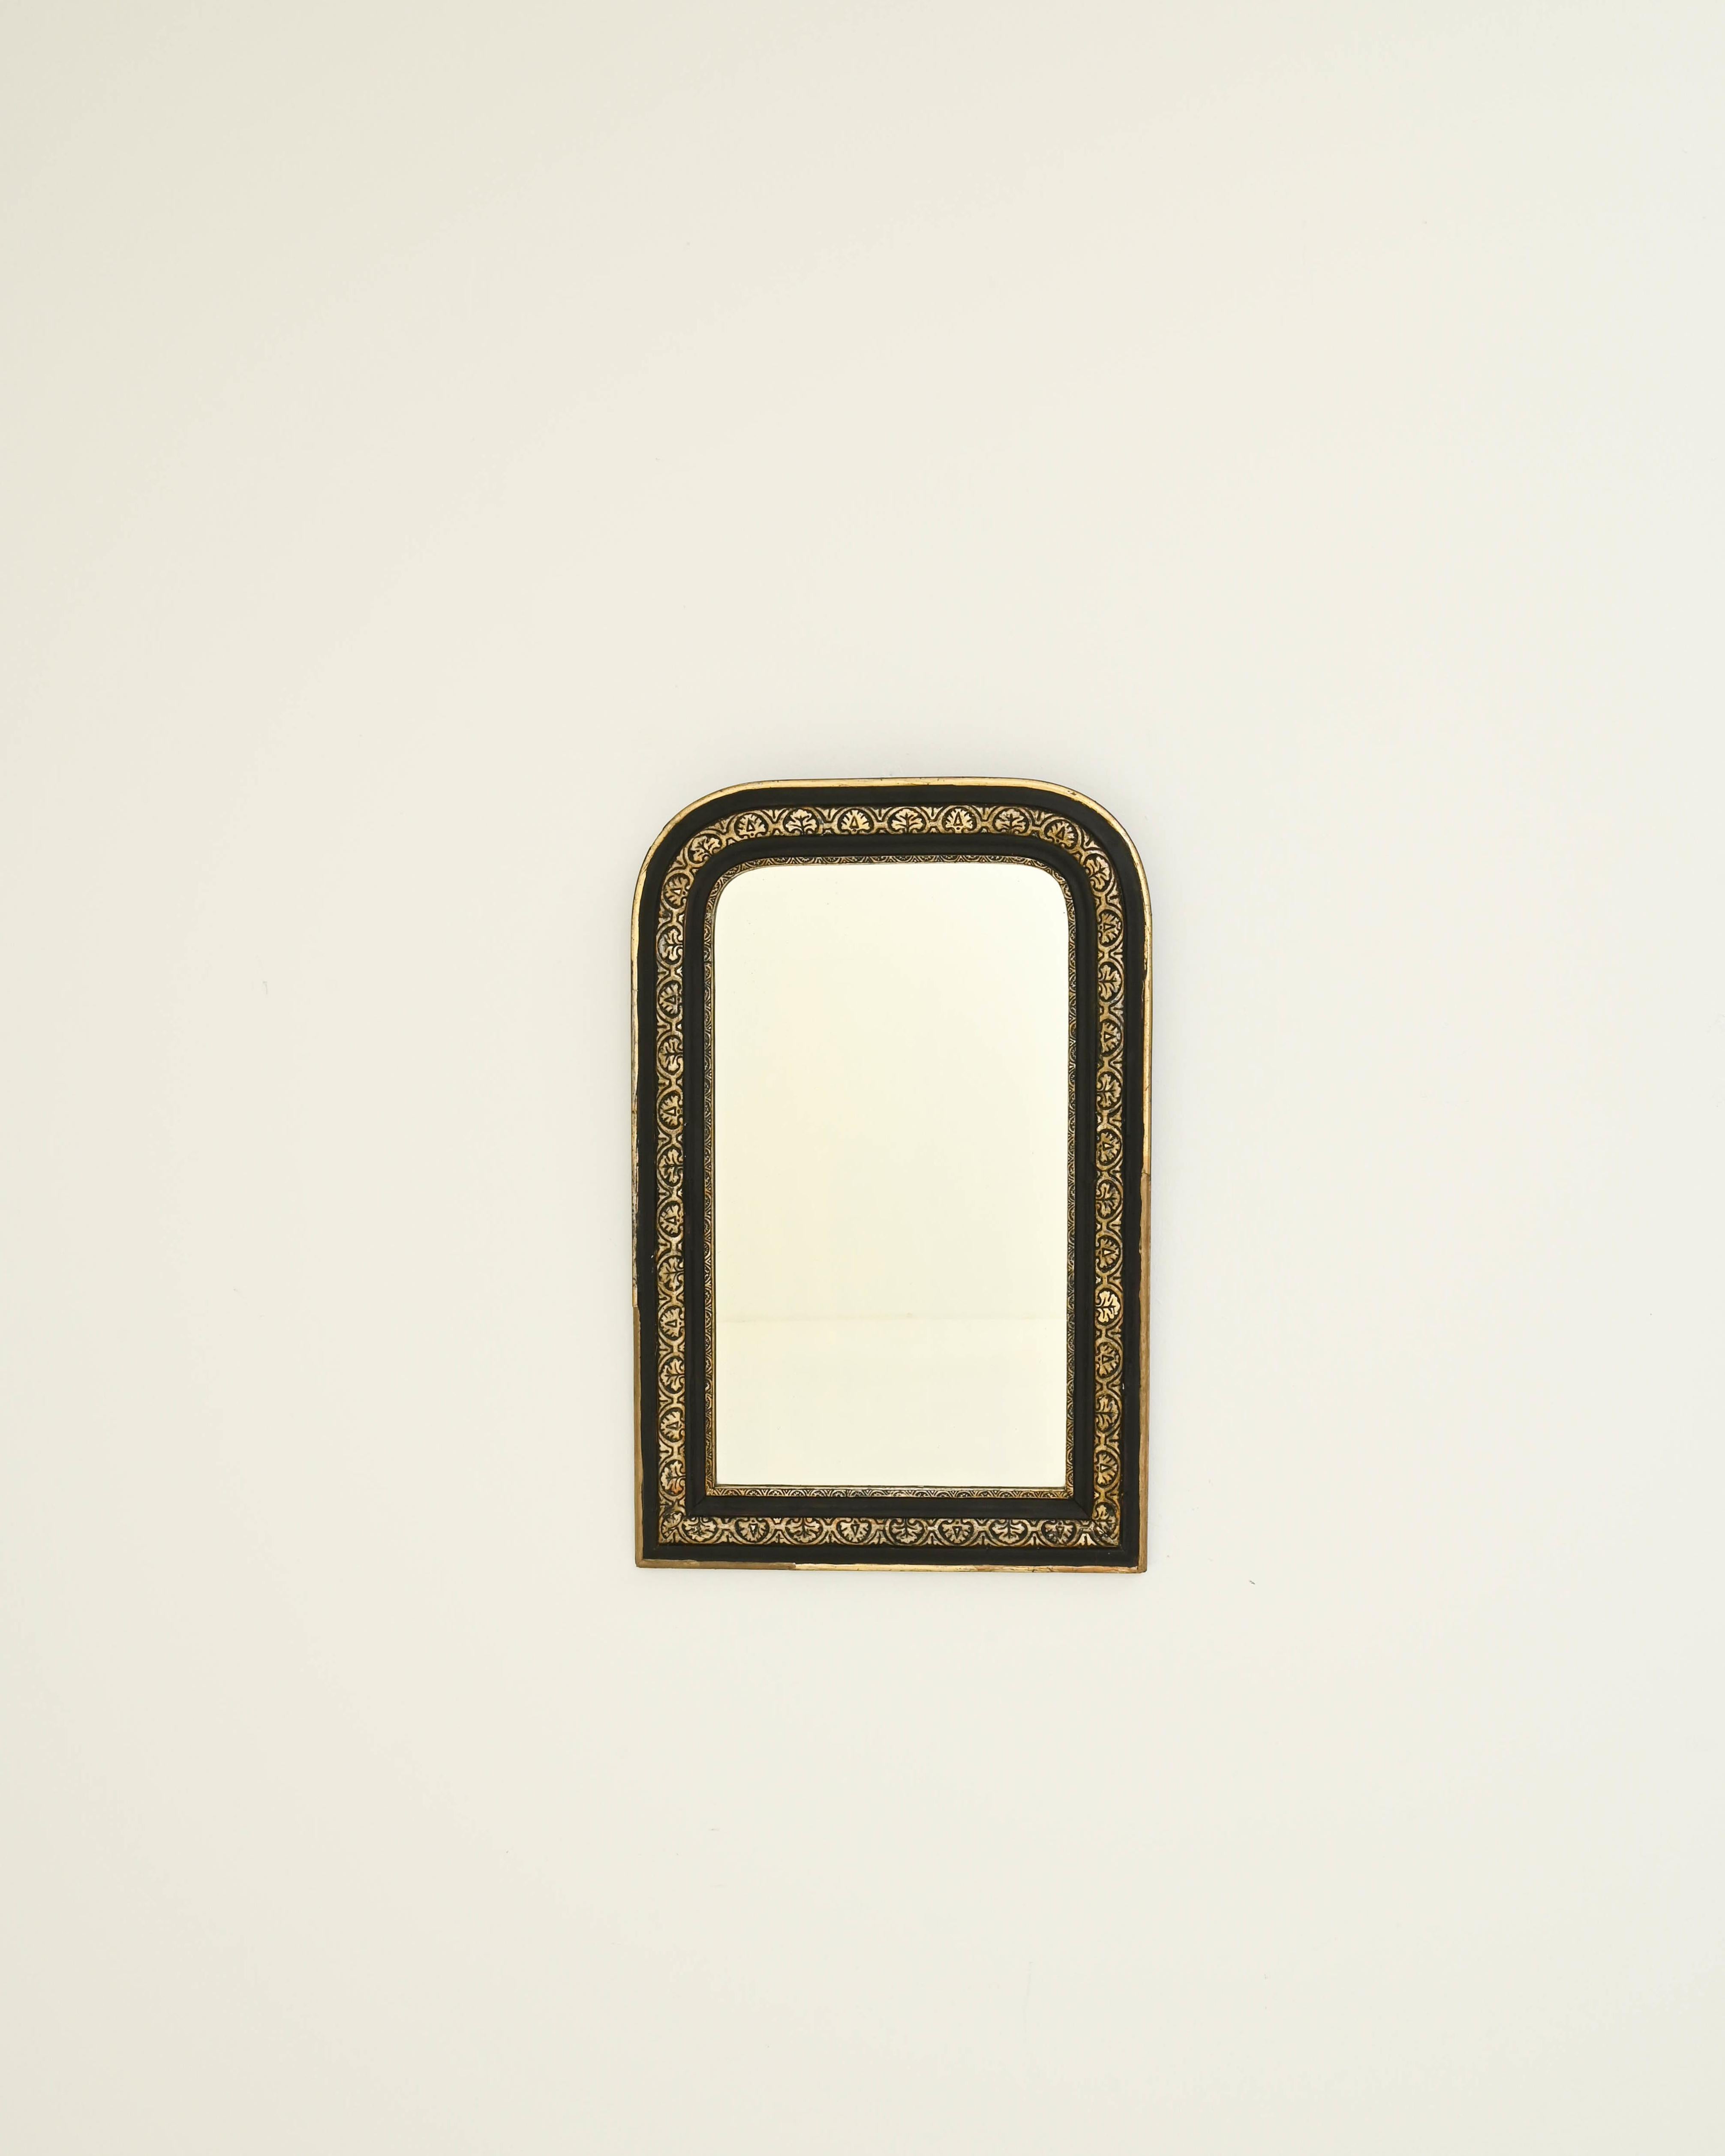 This Louis Philippe mirror was made in 19th-century France. It showcases an elegant black-patinated frame with rounded top corners and squared-off bottom corners, finished in gold leaf that accentuates the foliate pattern artfully carved in the